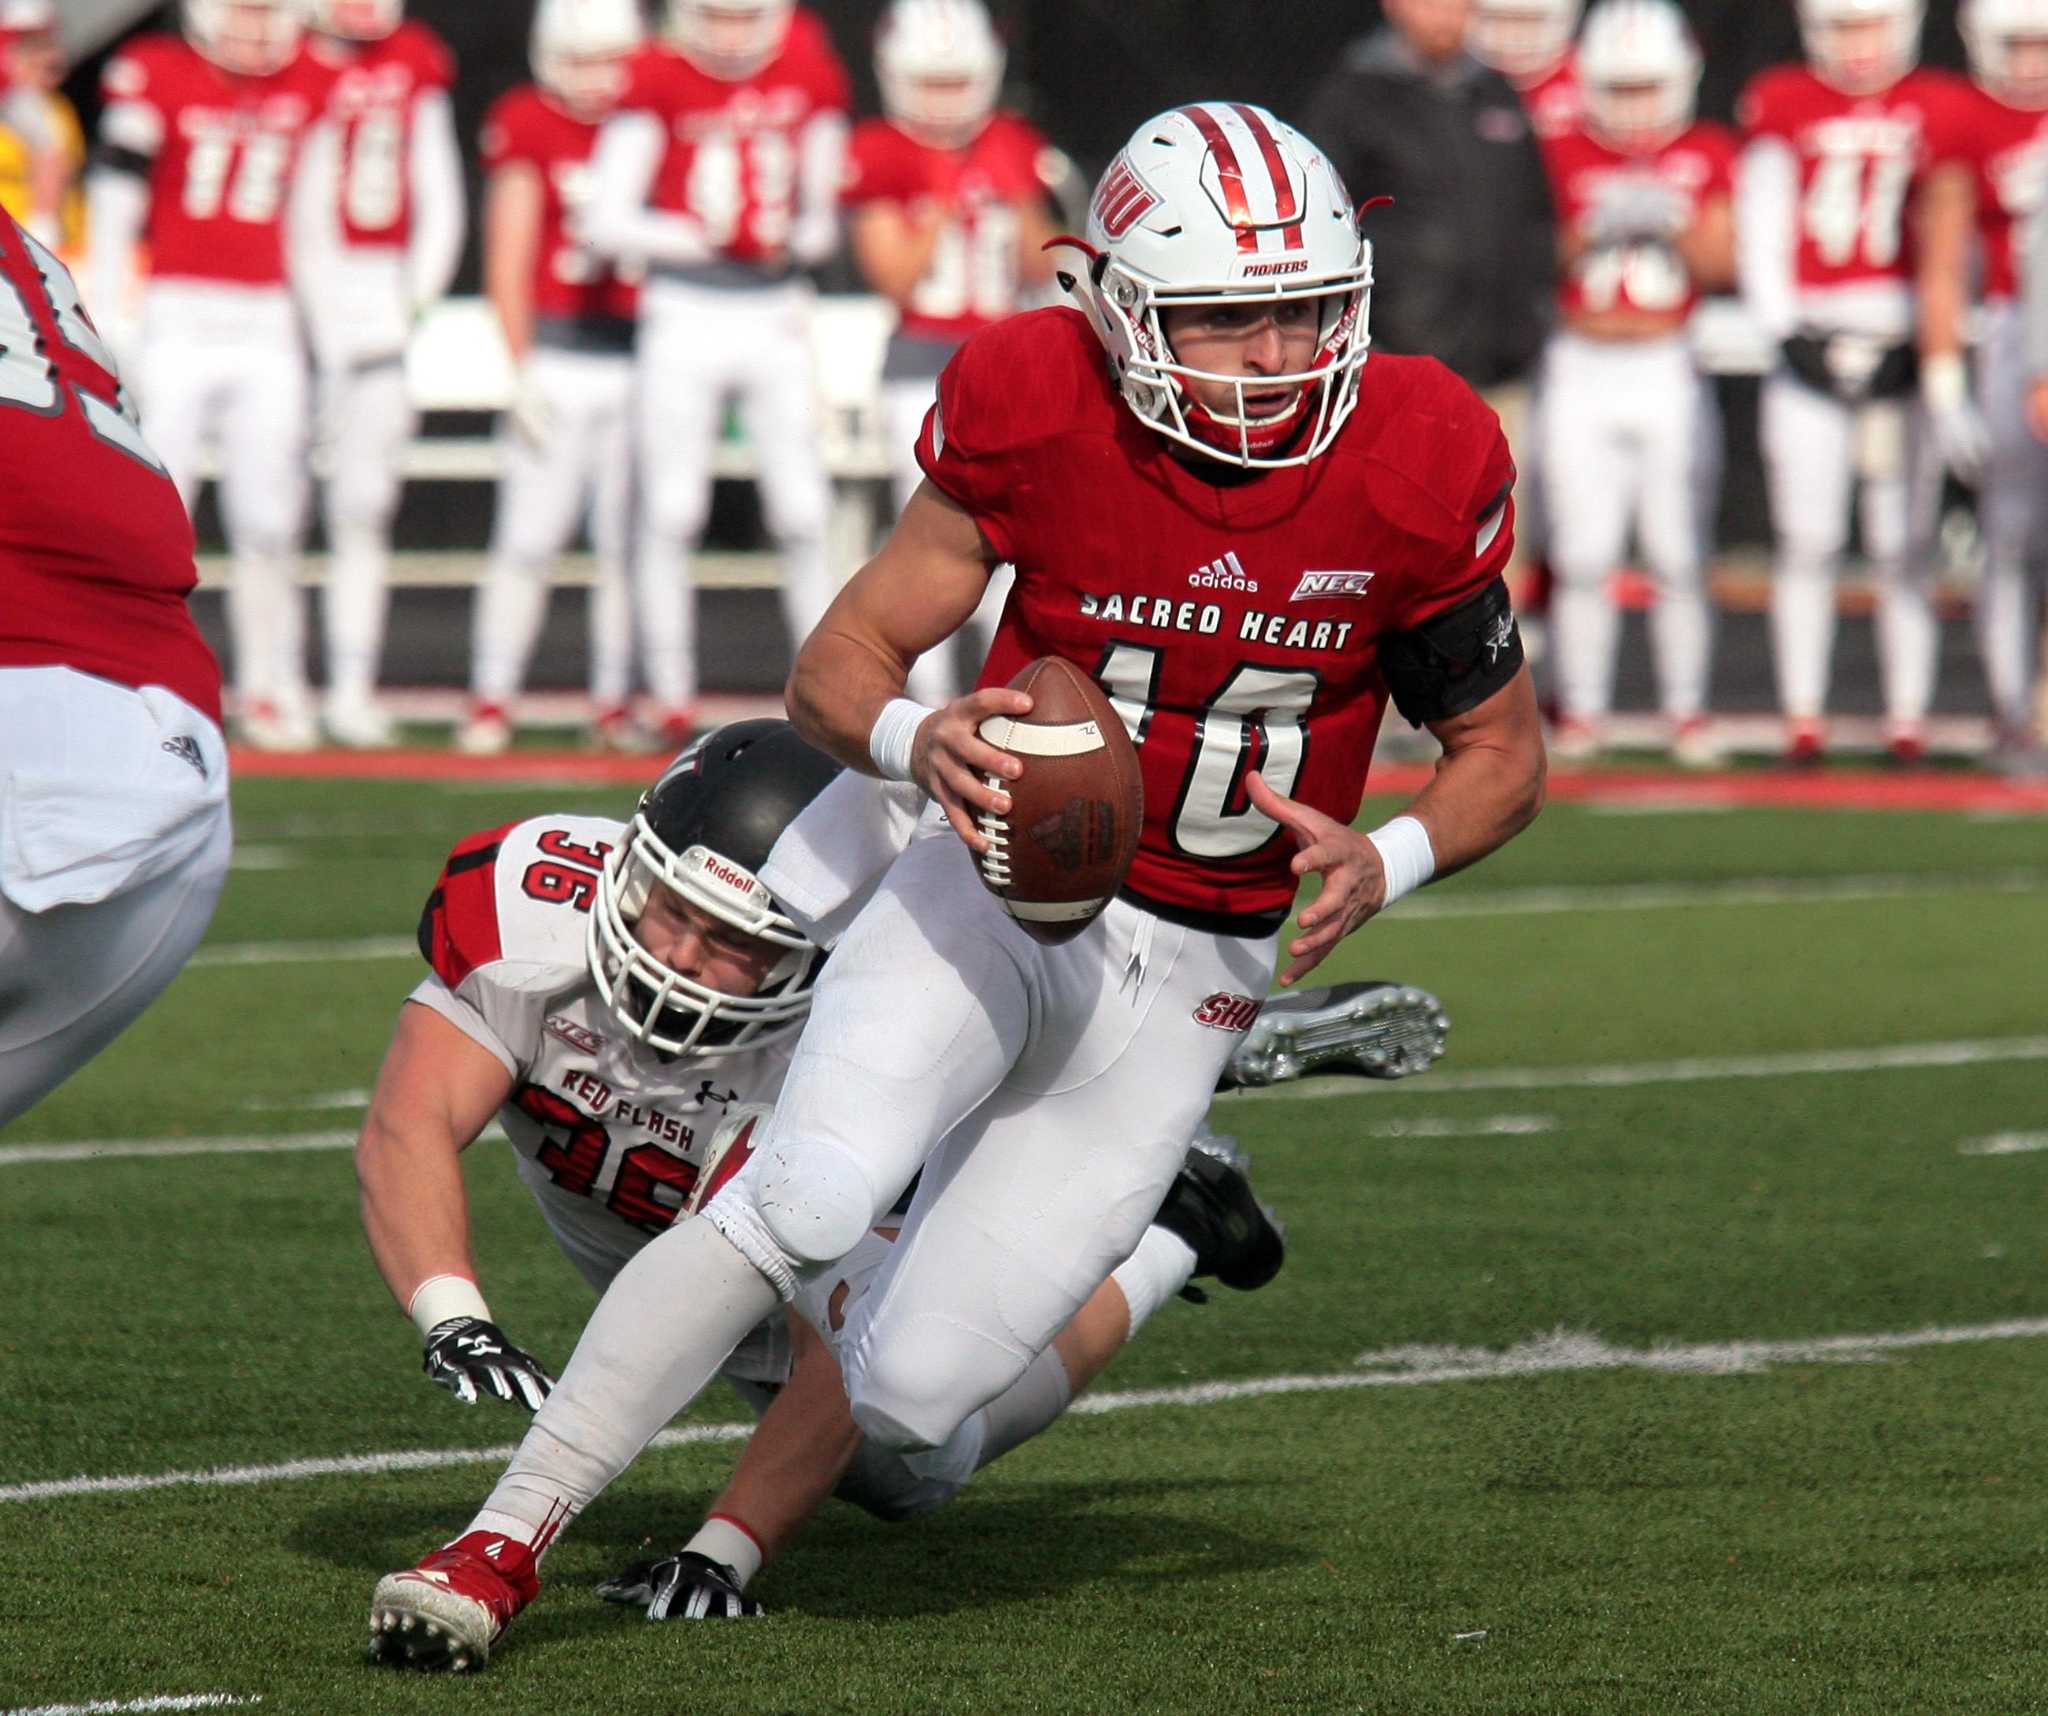 Sacred Heart wins share of NEC football title, tops St. Francis (Pa.)